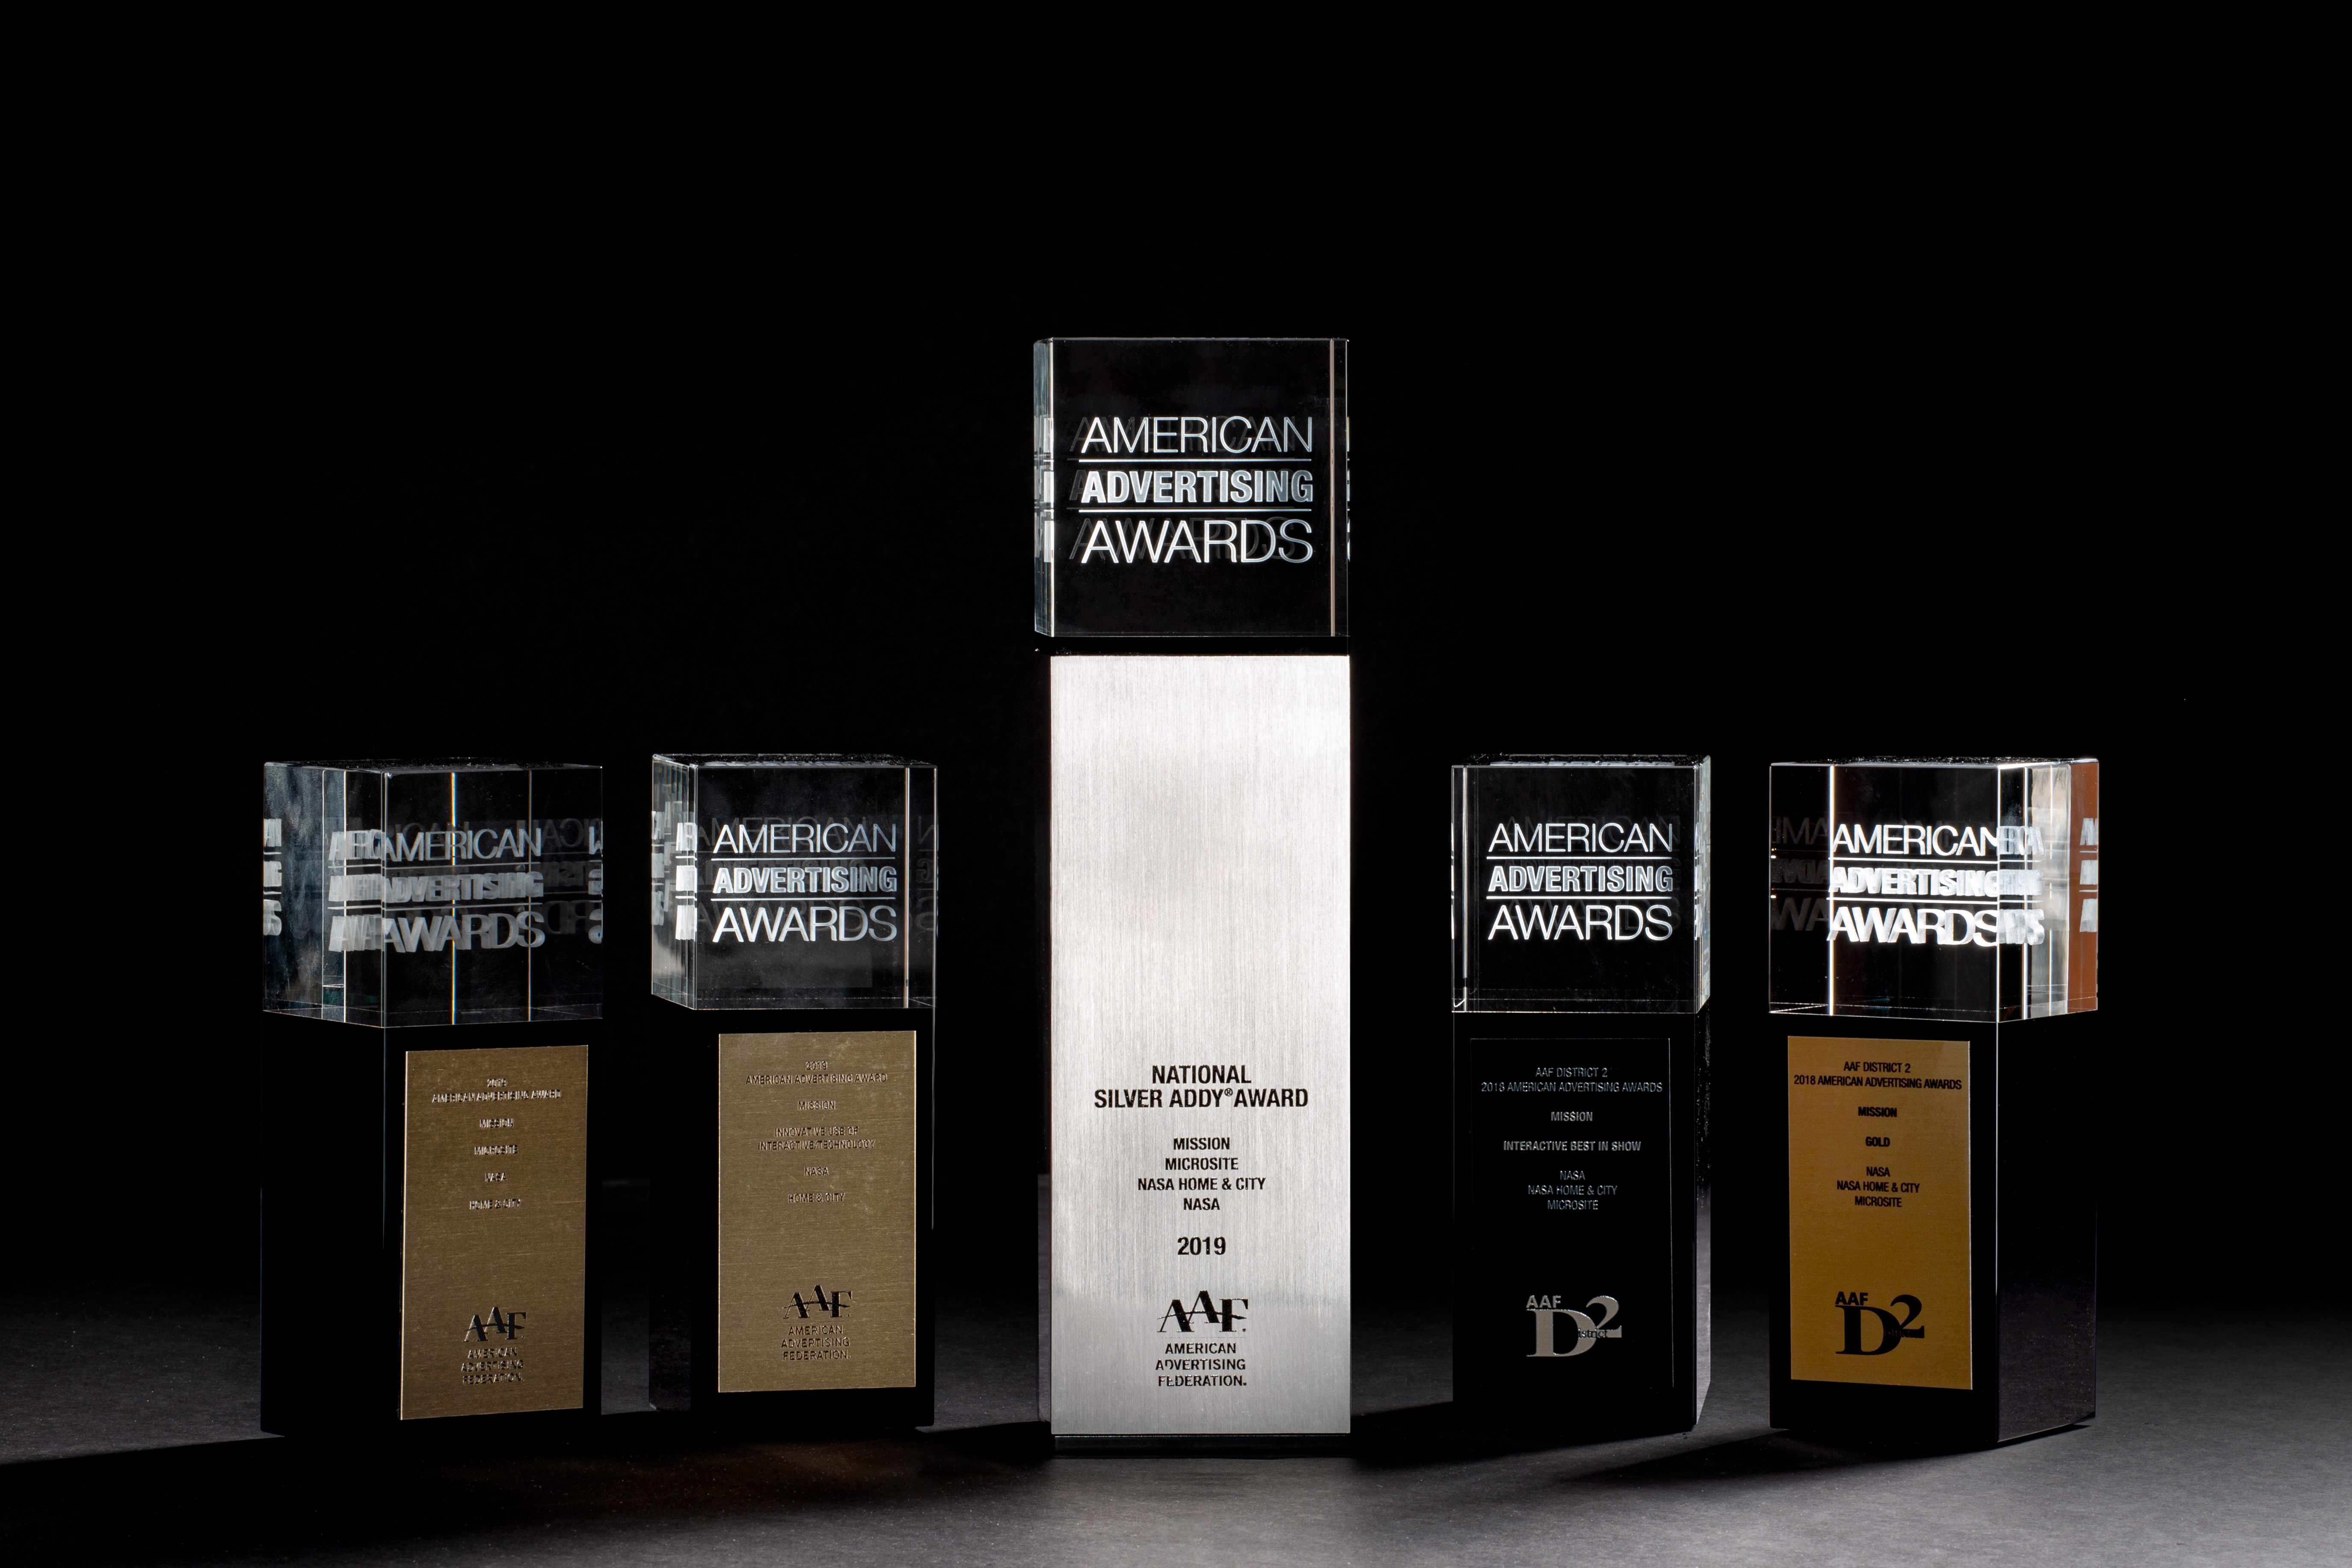 five american advertising awards in front of a black background